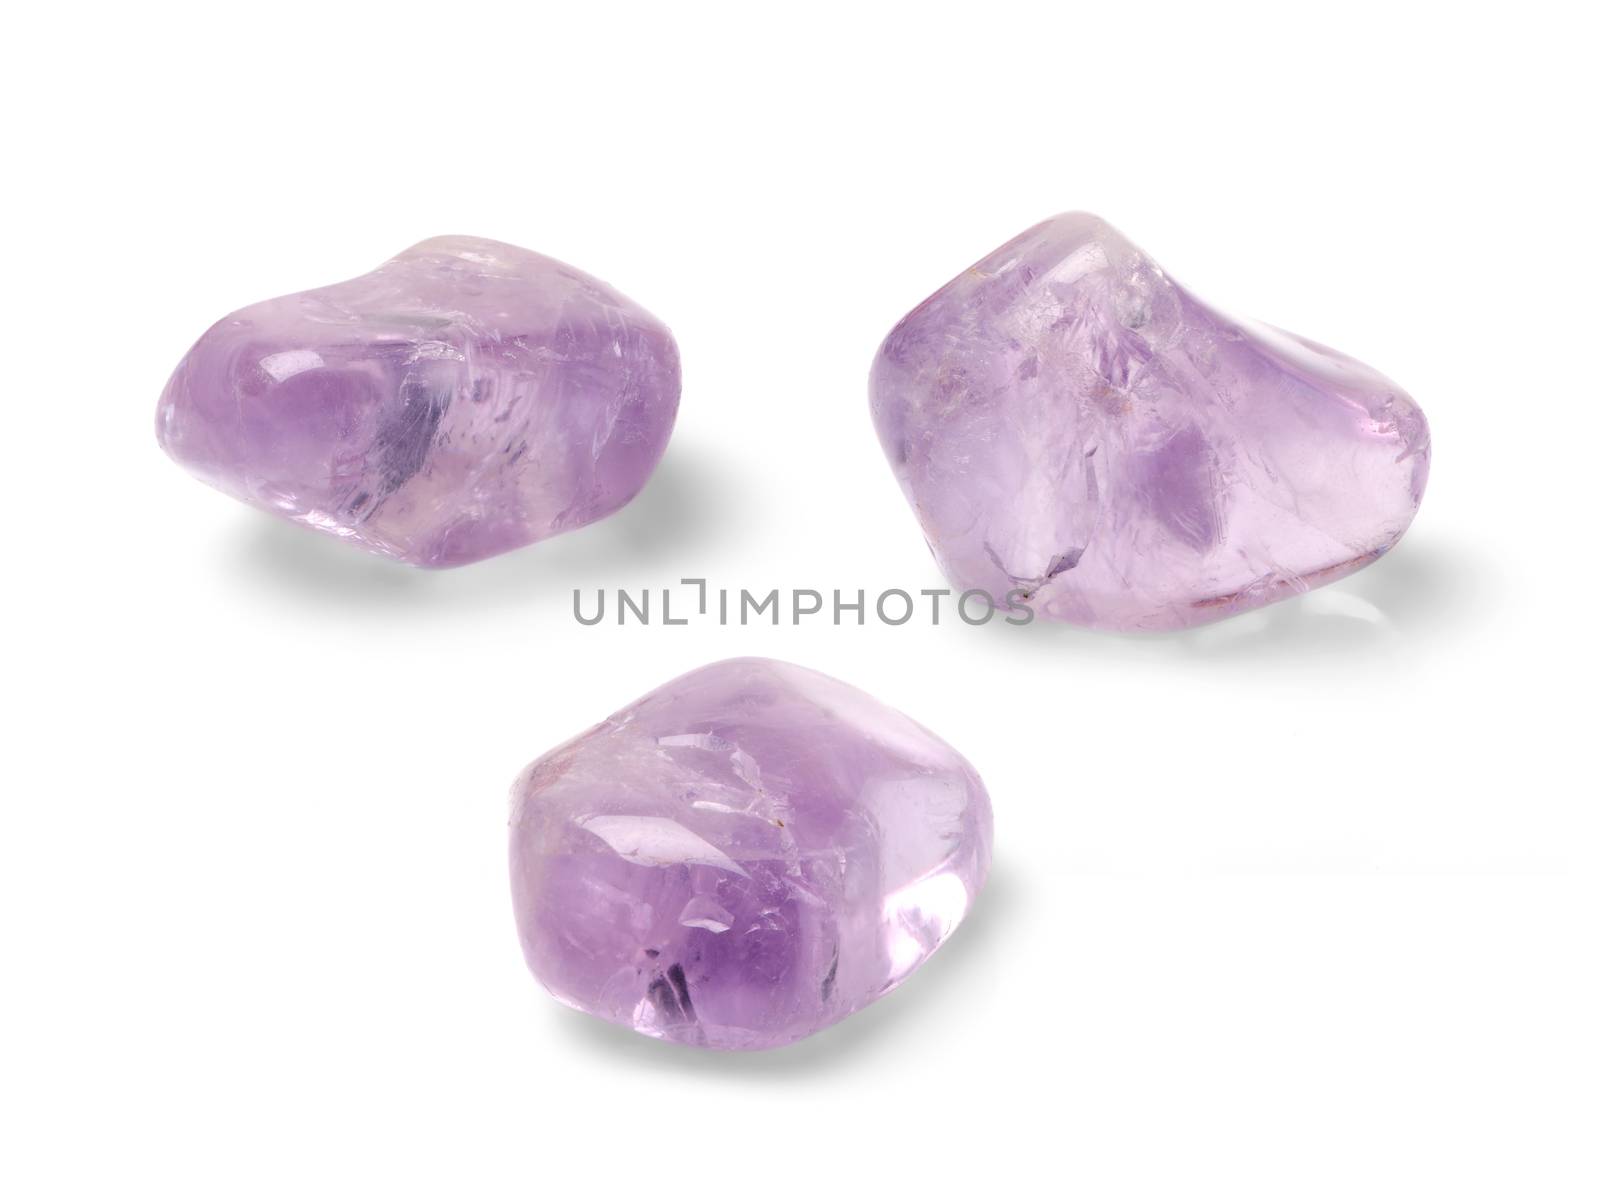 Amethyst shot from three angles isolated on white background.